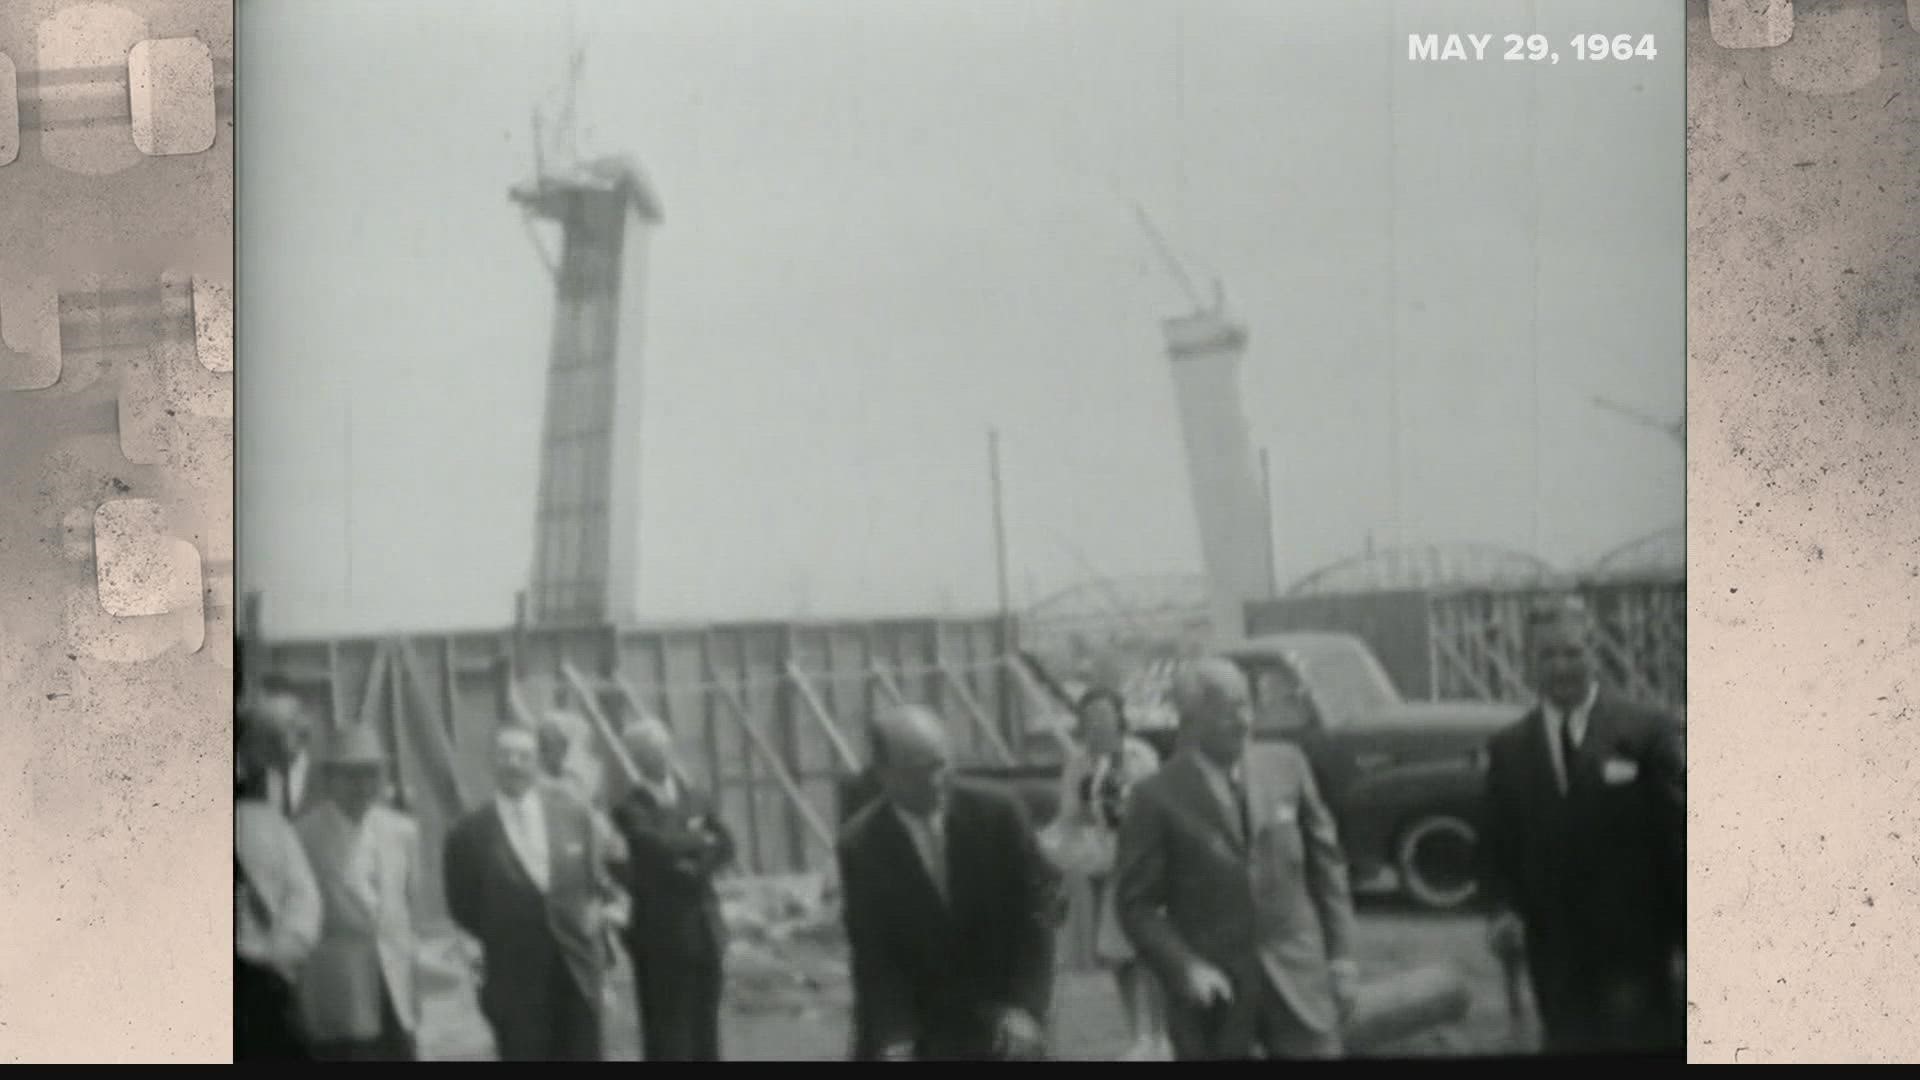 This week's Vintage KSDK goes back to May 29, 1964, when ground was broken on the three towers of the Mansion House apartments downtown.